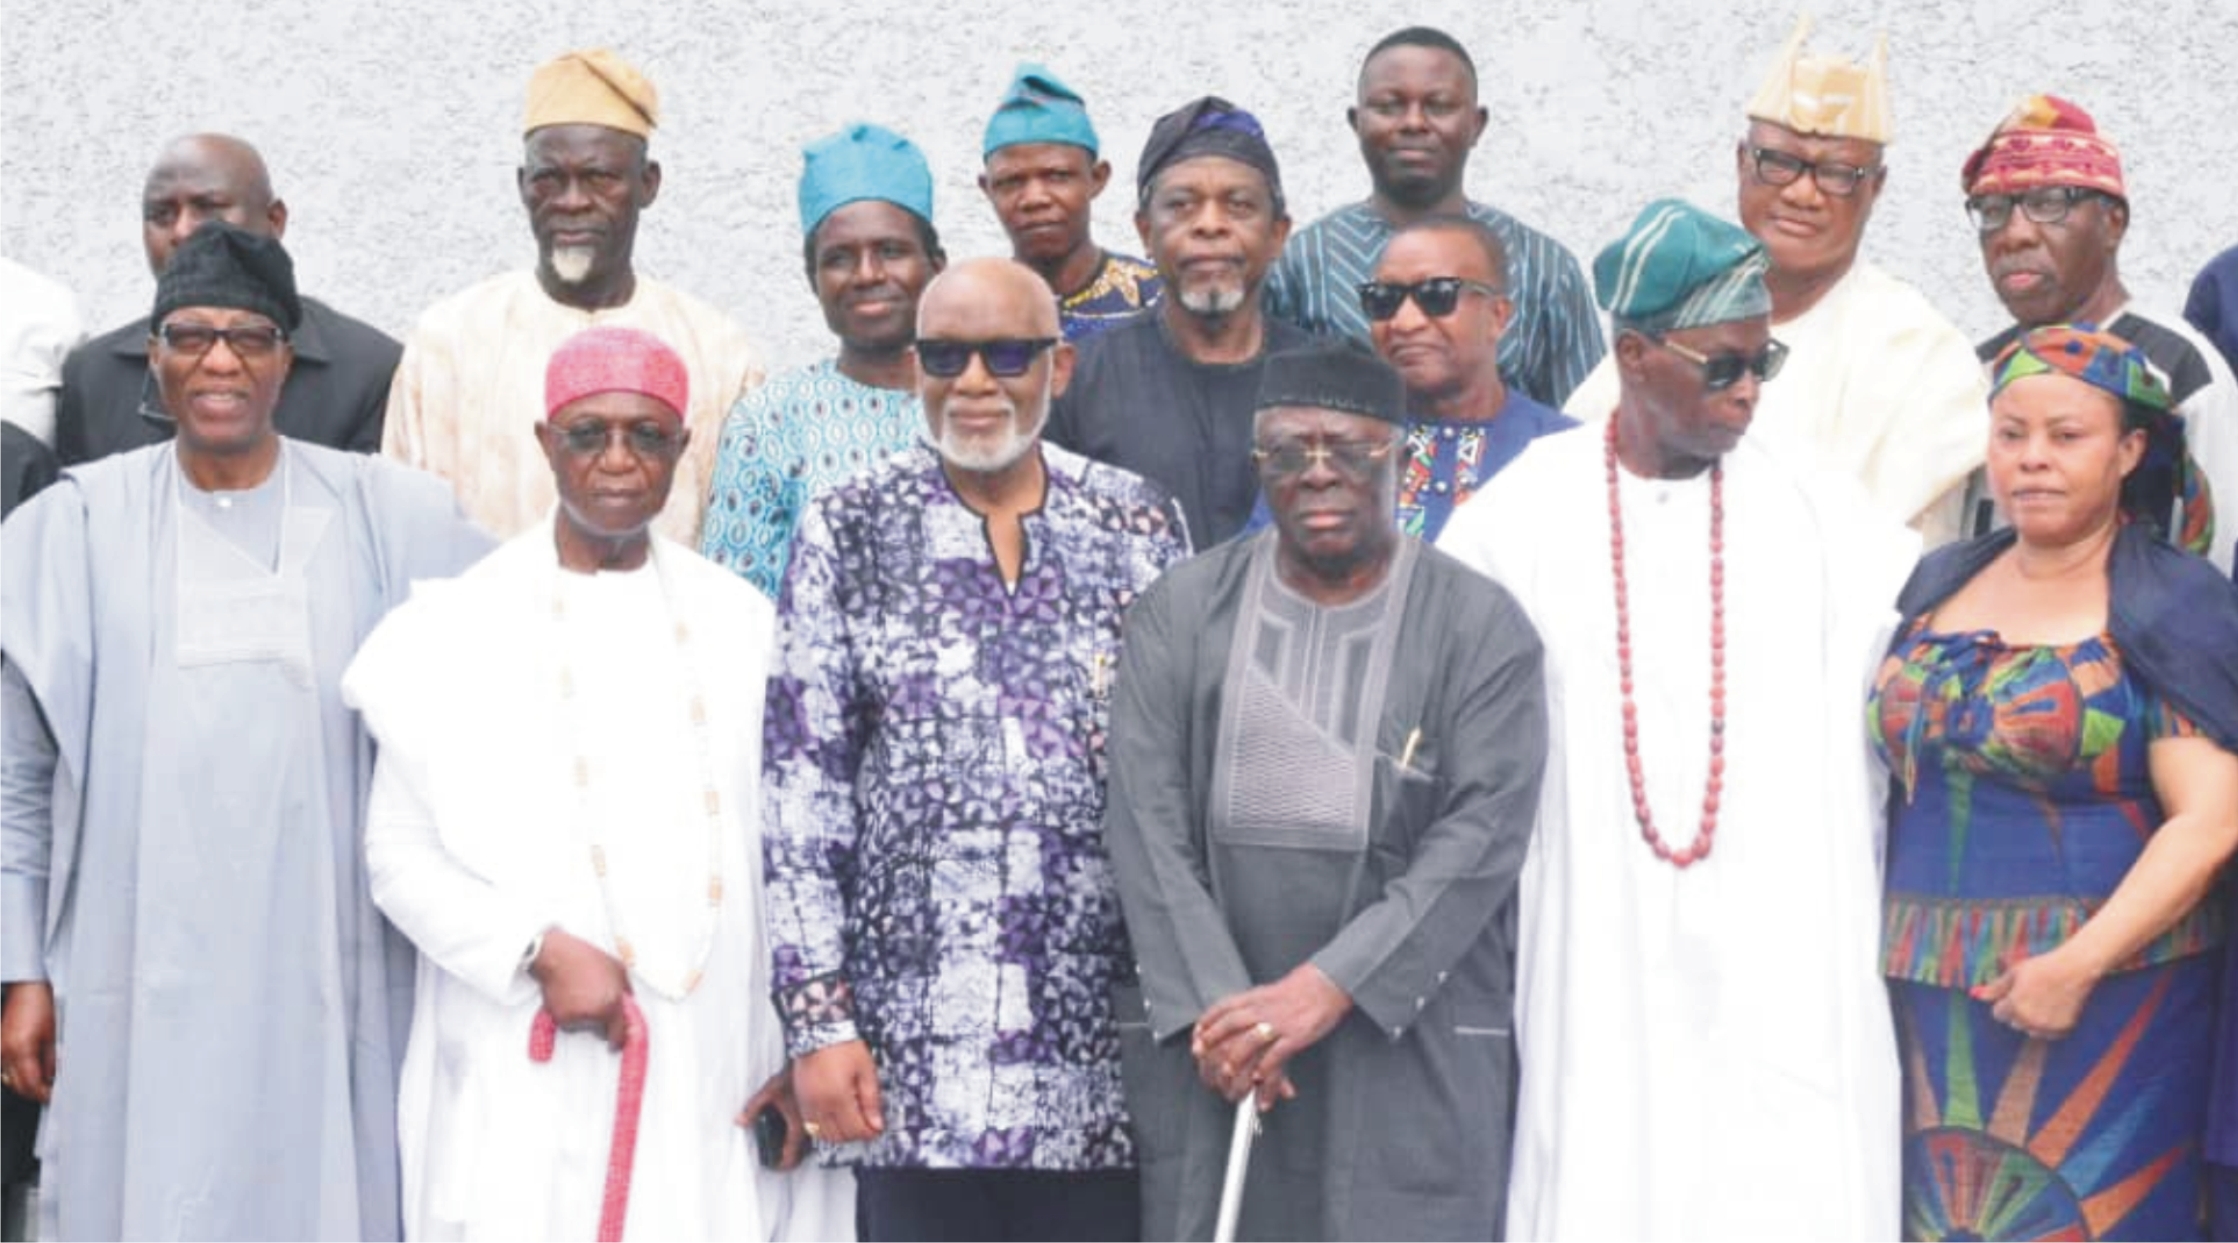 From left: Former Ogun State Governor and member, Yoruba Socio-Cultural Group, Afenifere, Otunba Gbenga Daniel, Deputy National Leader of the Group and Olu of Alago Kajola, Oba Oladipo Olaitan, Ondo State Governor, Arakunrin Oluwarotimi Akeredolu, National Leader of the group, Chief Ayo Adebanjo, former Secretary to Government of the Federation (SGF) and member, Chief Olu Falae, Secretary to Ondo State Government, Princess Oladunni Odu and other dignitaries, after a condolence visit to the Governor in his office yesterday, over the massacre of worshippers at the St. Francis Catholic Church in Owo last Sunday